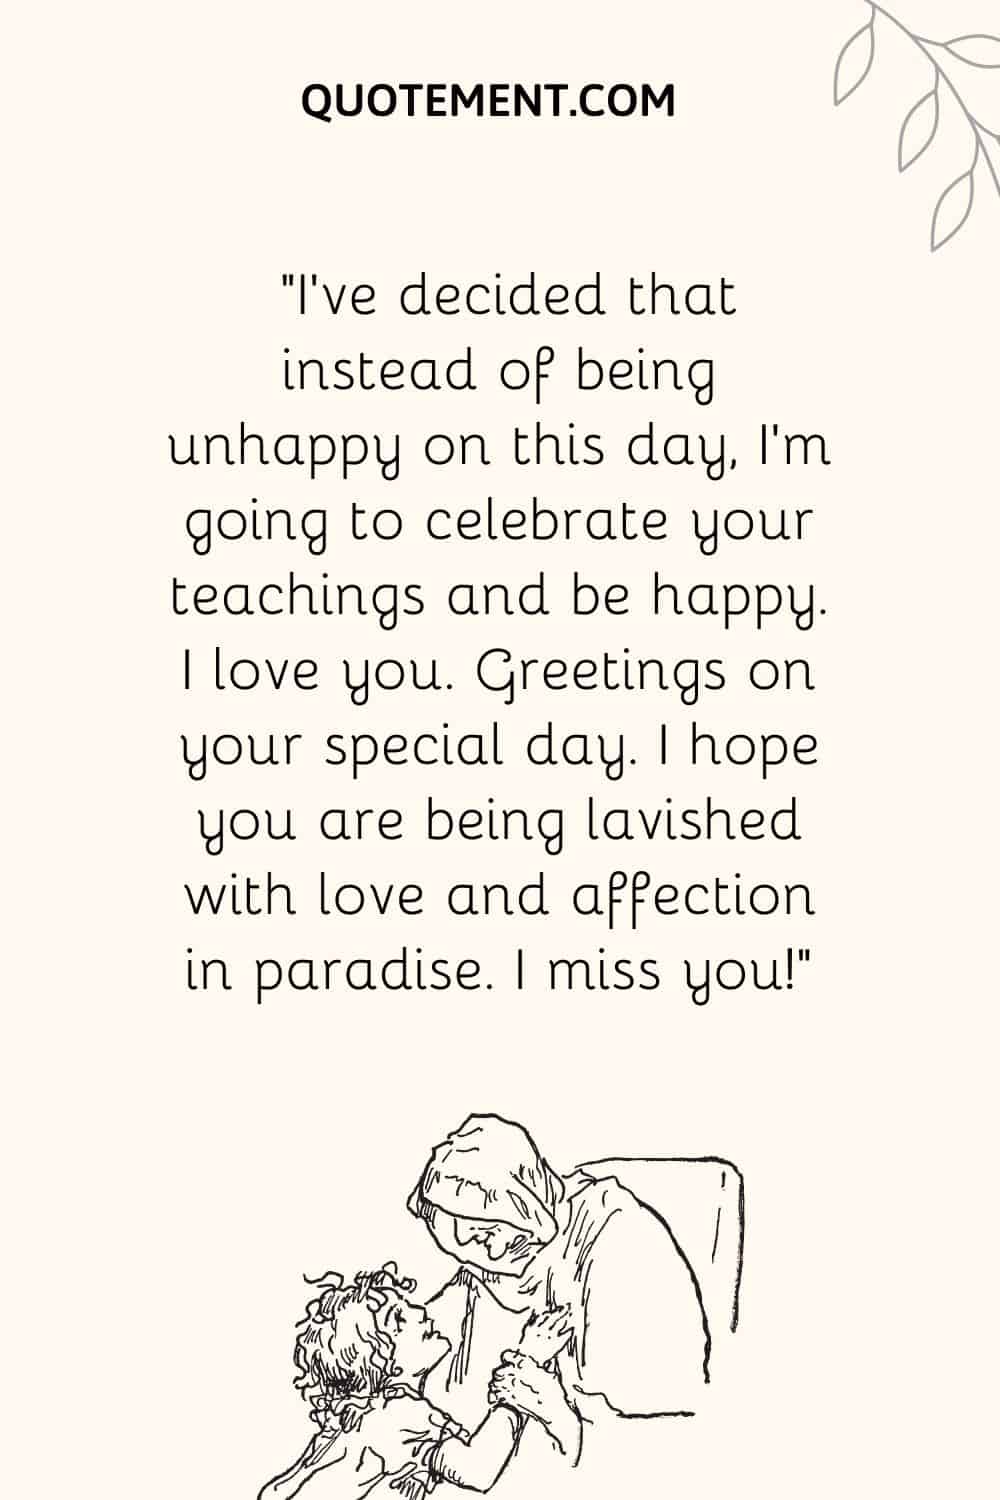 “I’ve decided that instead of being unhappy on this day, I’m going to celebrate your teachings and be happy. I love you.